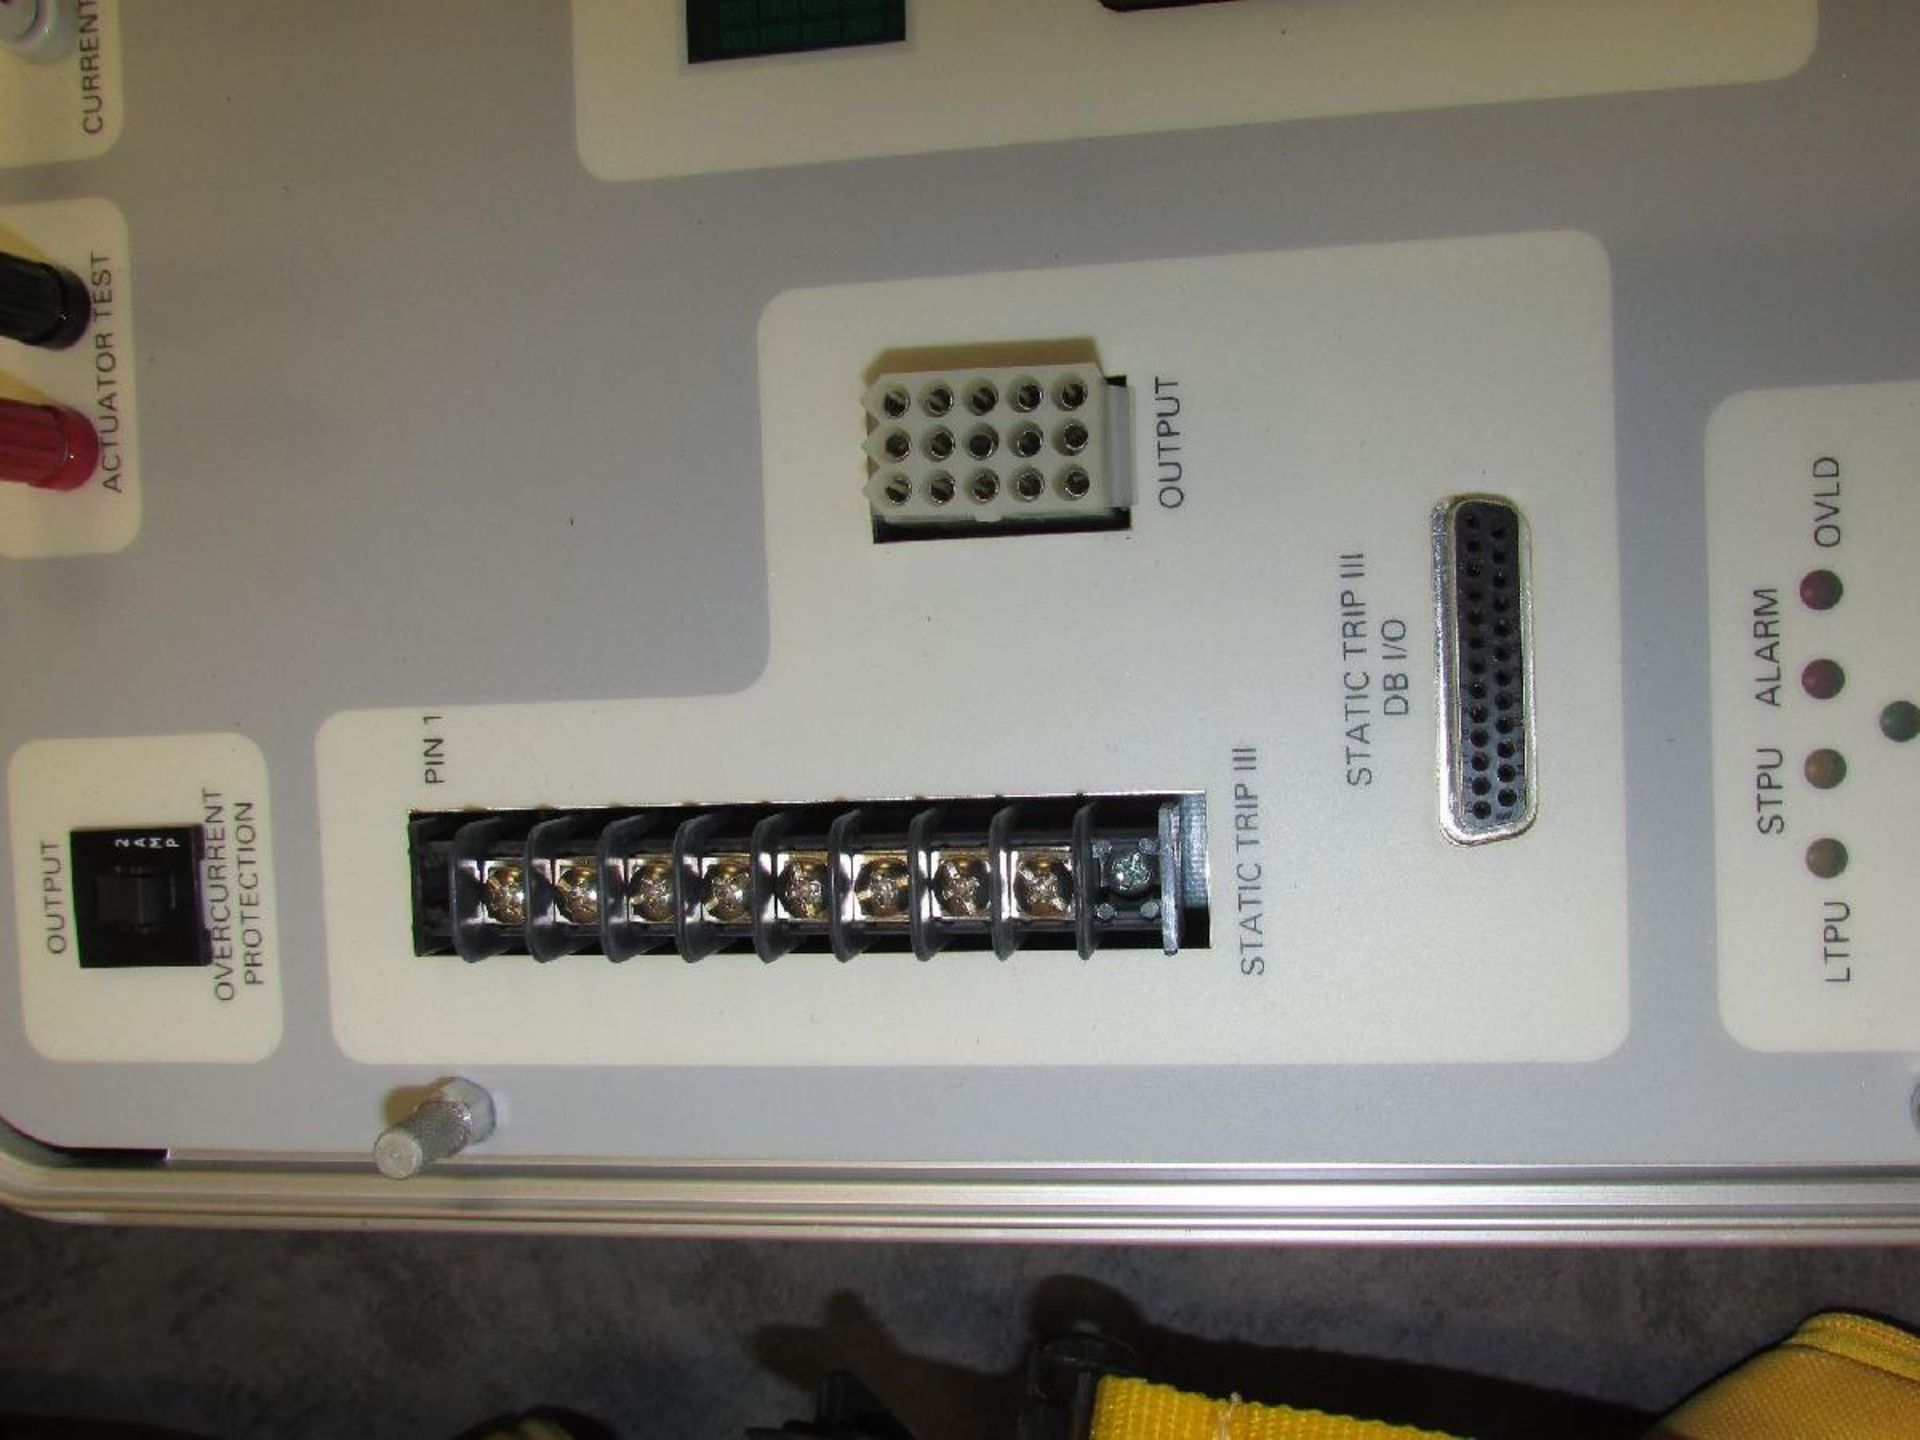 Siemens Model PTS5 Portable Static Overcurrent Tripping System Tester - Image 3 of 4